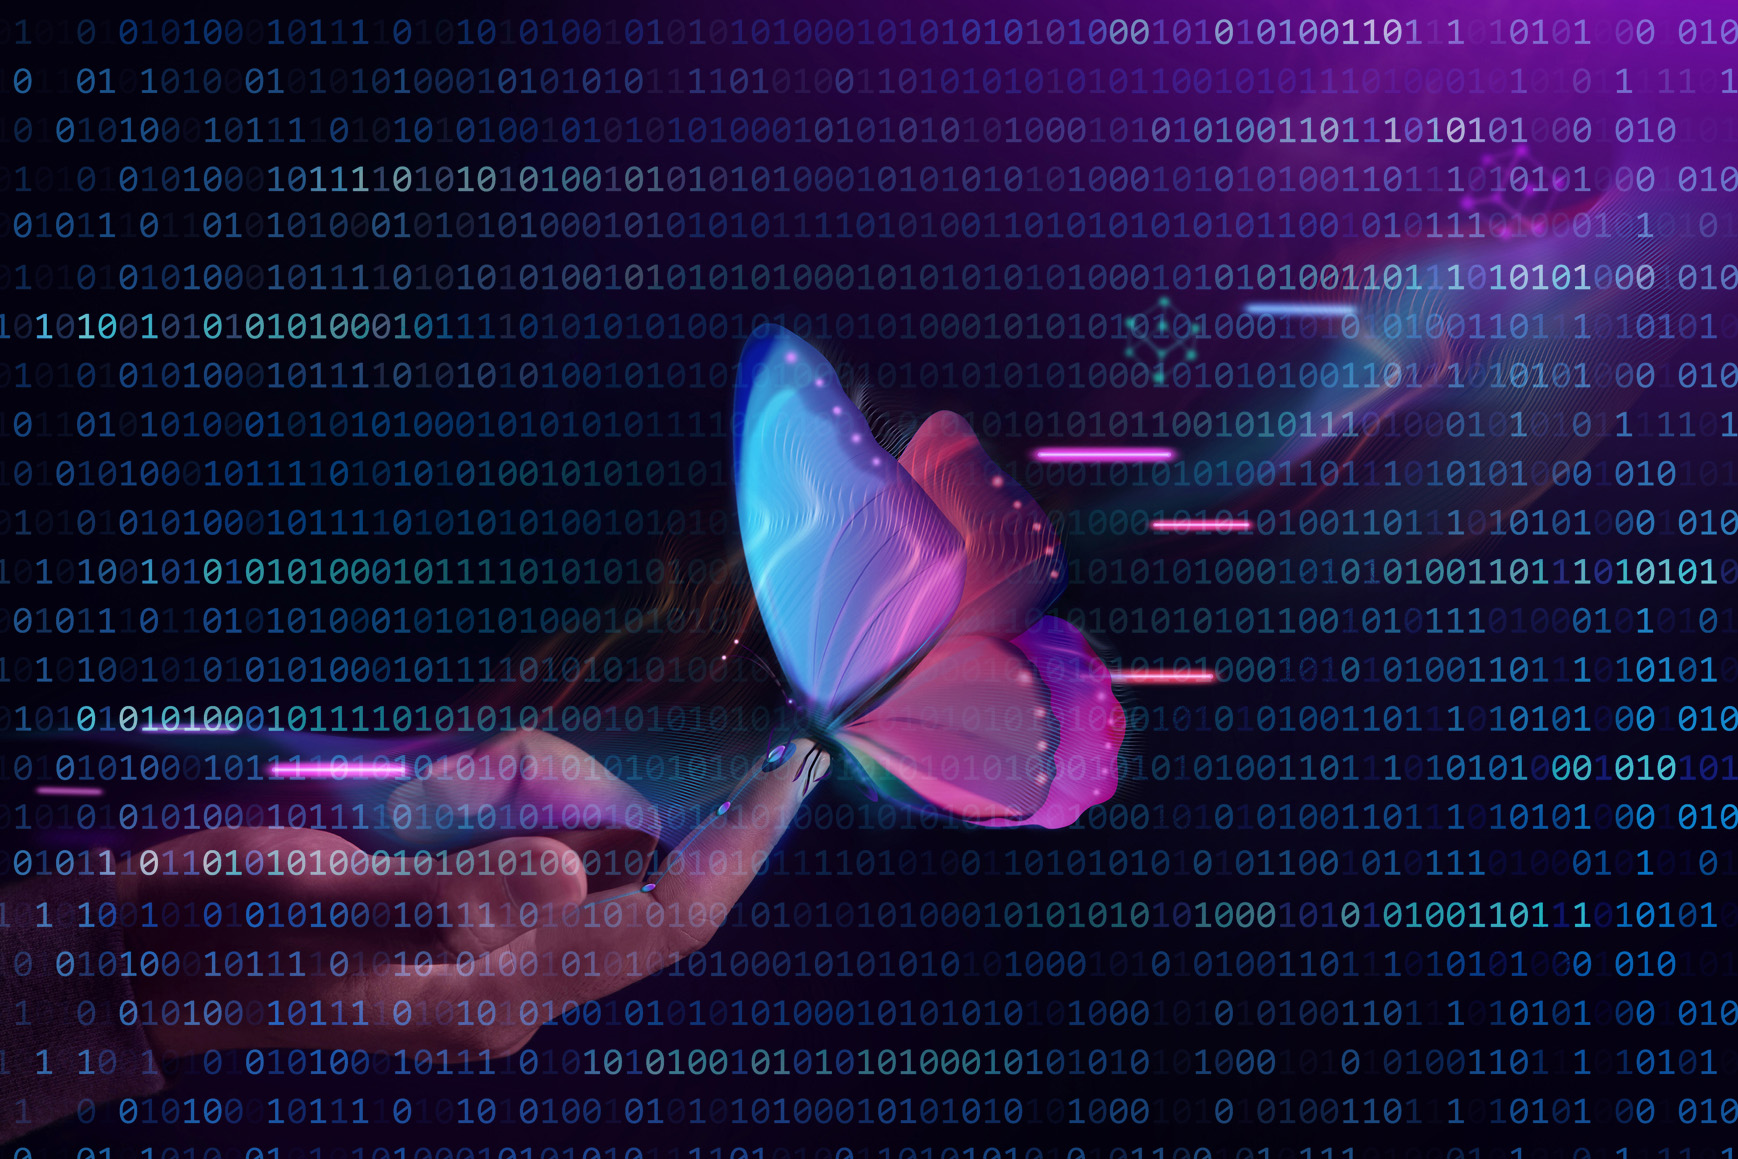 Digital image Biosensor Technology Concepts. New Experiences with Metaverse, Web3 and Blockchain. Hand Interacting with the Computer Graphic Surrealism Butterfly via Biosensor Tech digital code